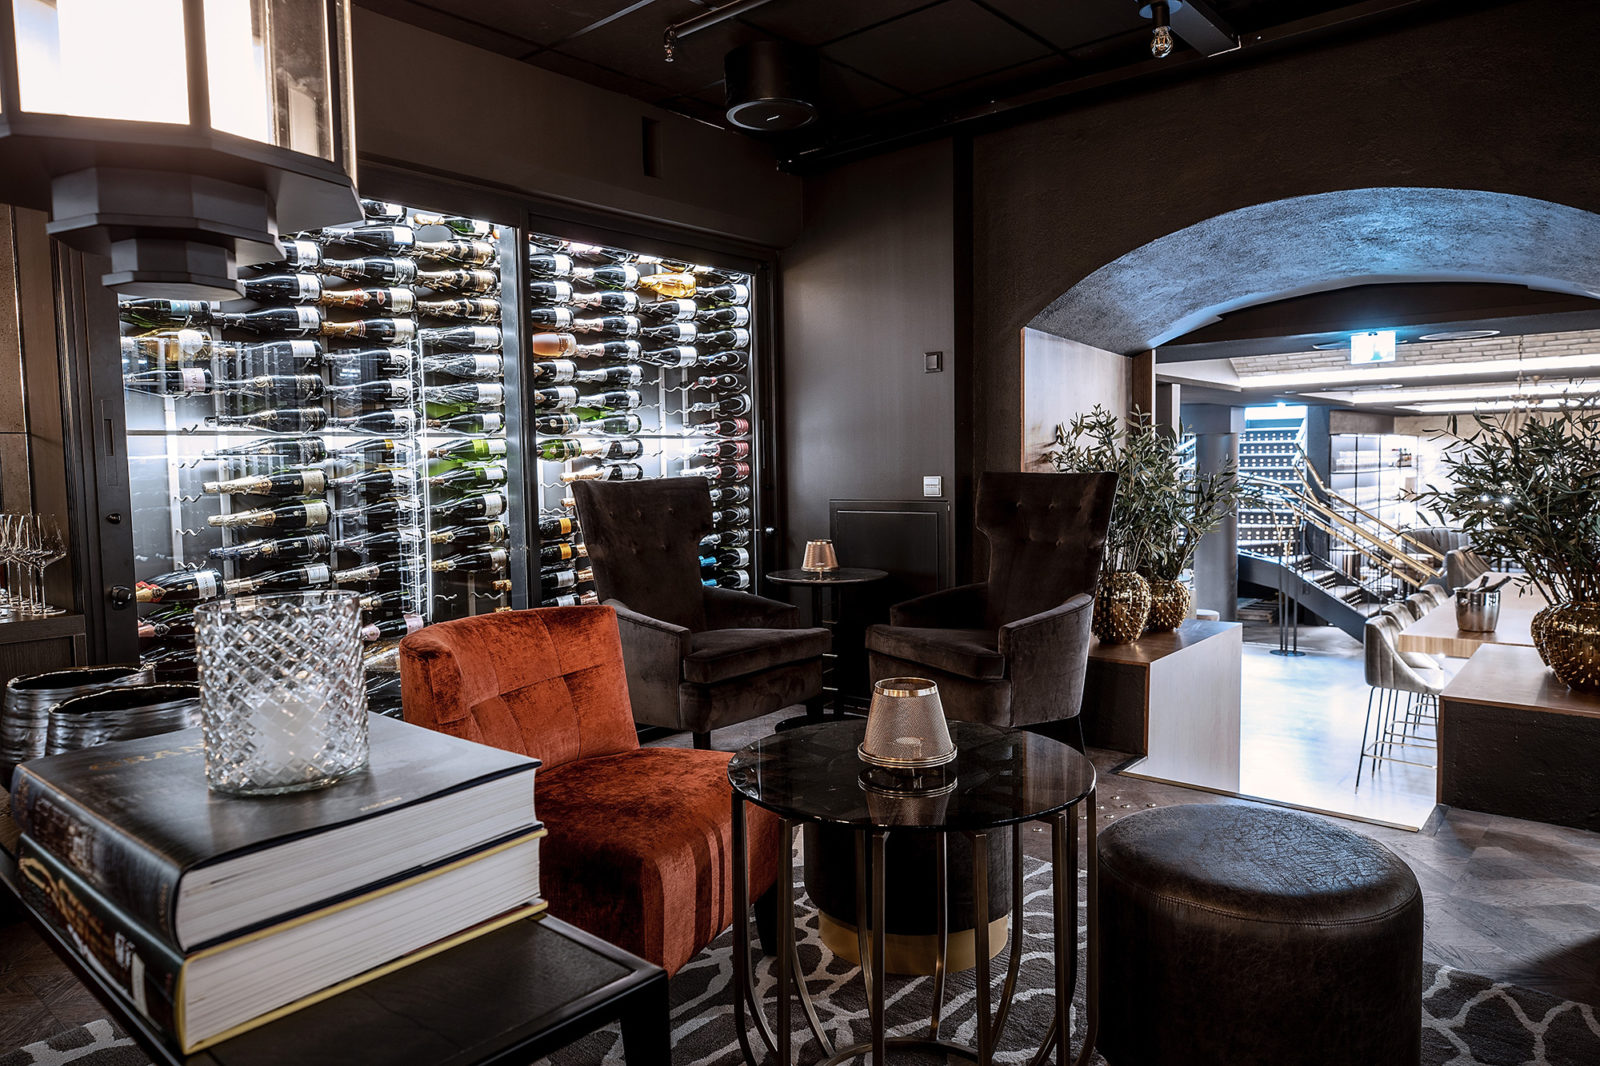 Velour chairs and small tables for wine serving, walls covered with wine bottles